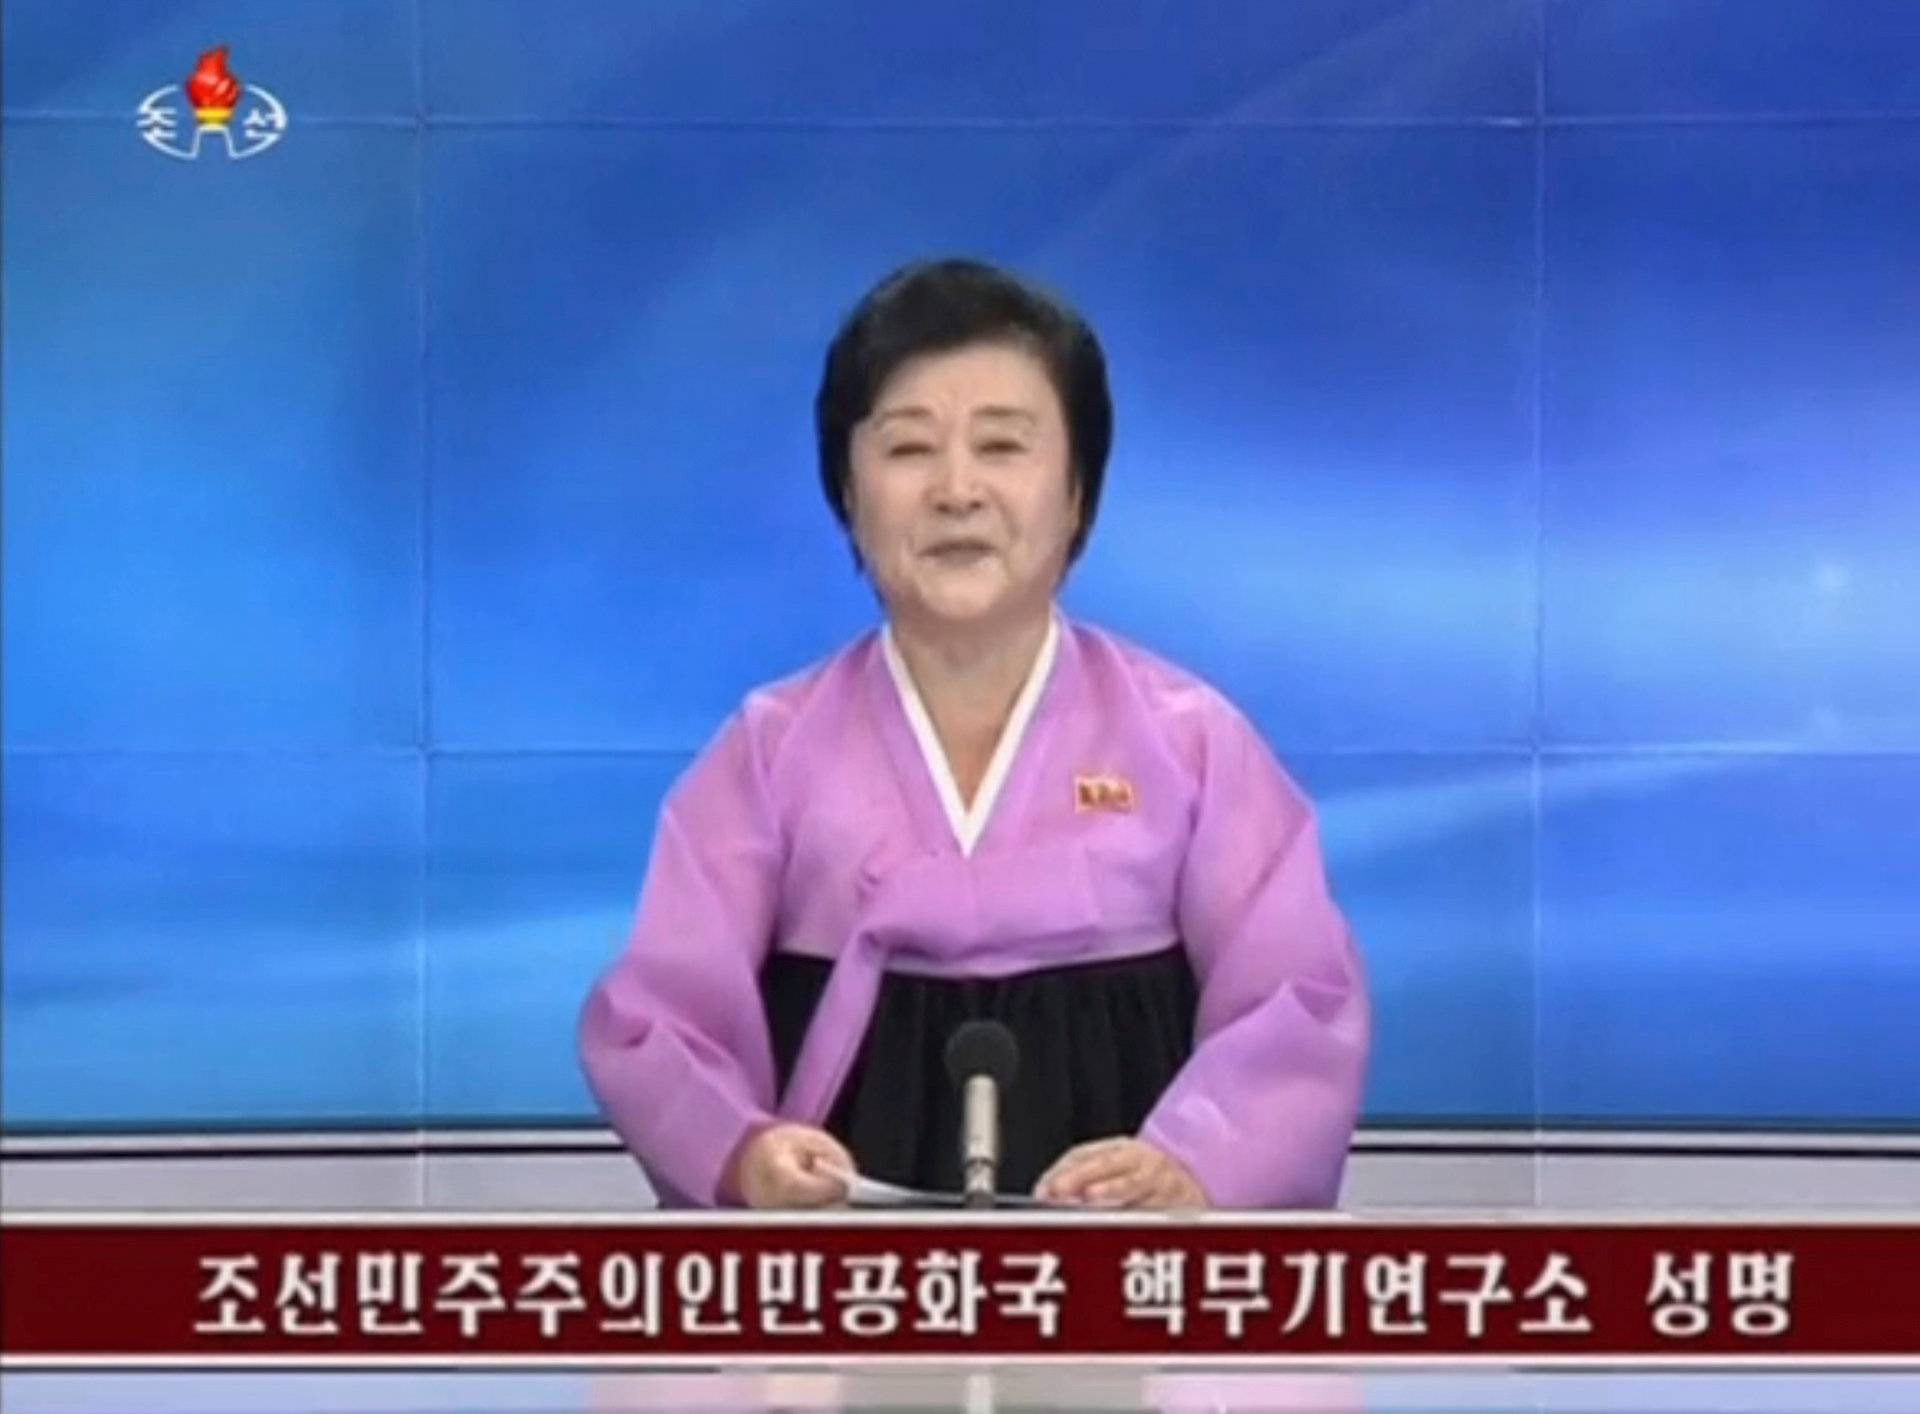 KRT newscaster confirming that North Korea has conducted a nuclear test